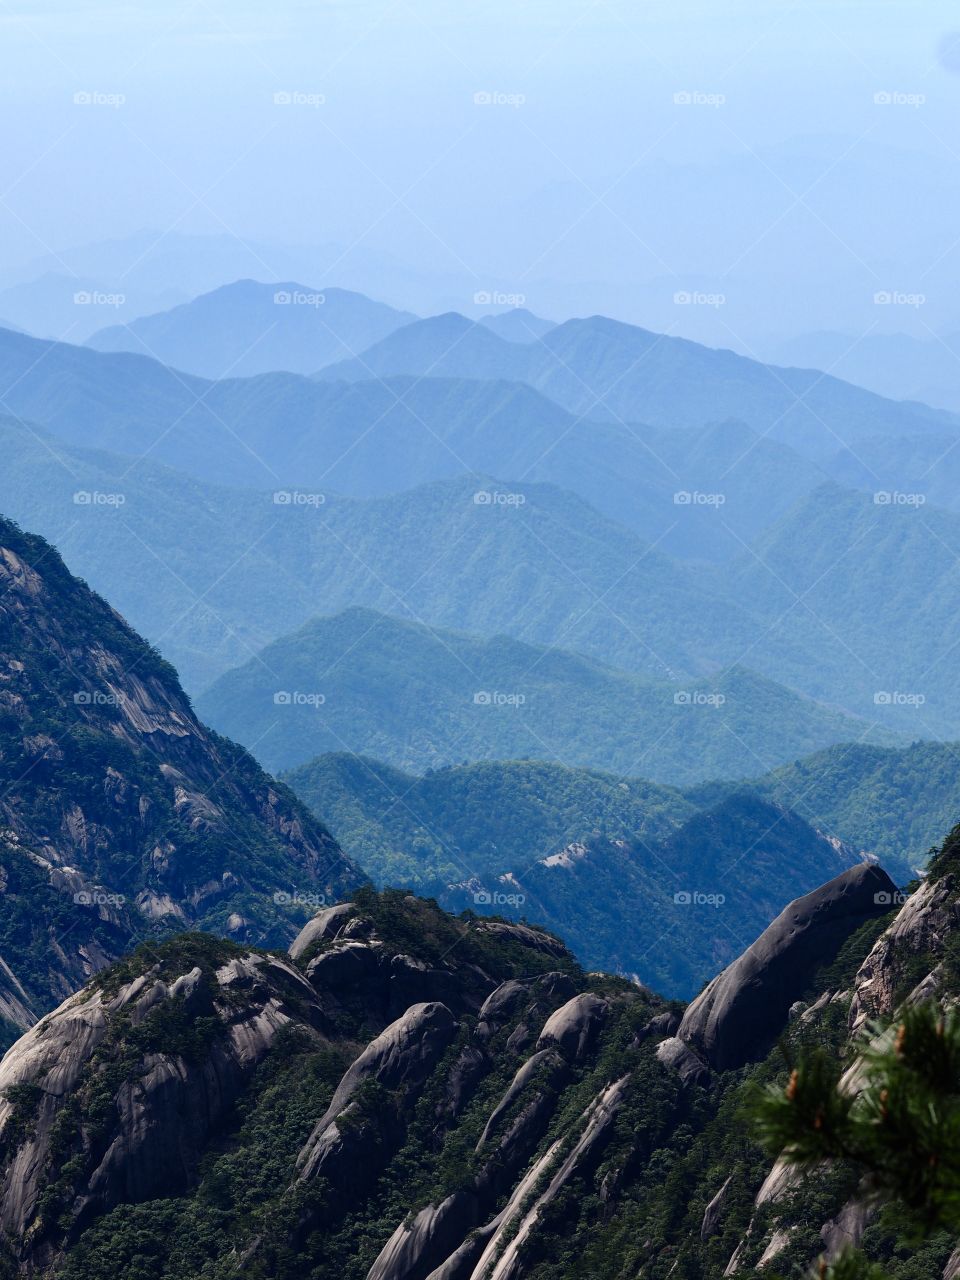 This photo was taken at the summit of Mt Huangshan or the Yellow Mountains in the province of Anhui in China. Taken in April 2019.